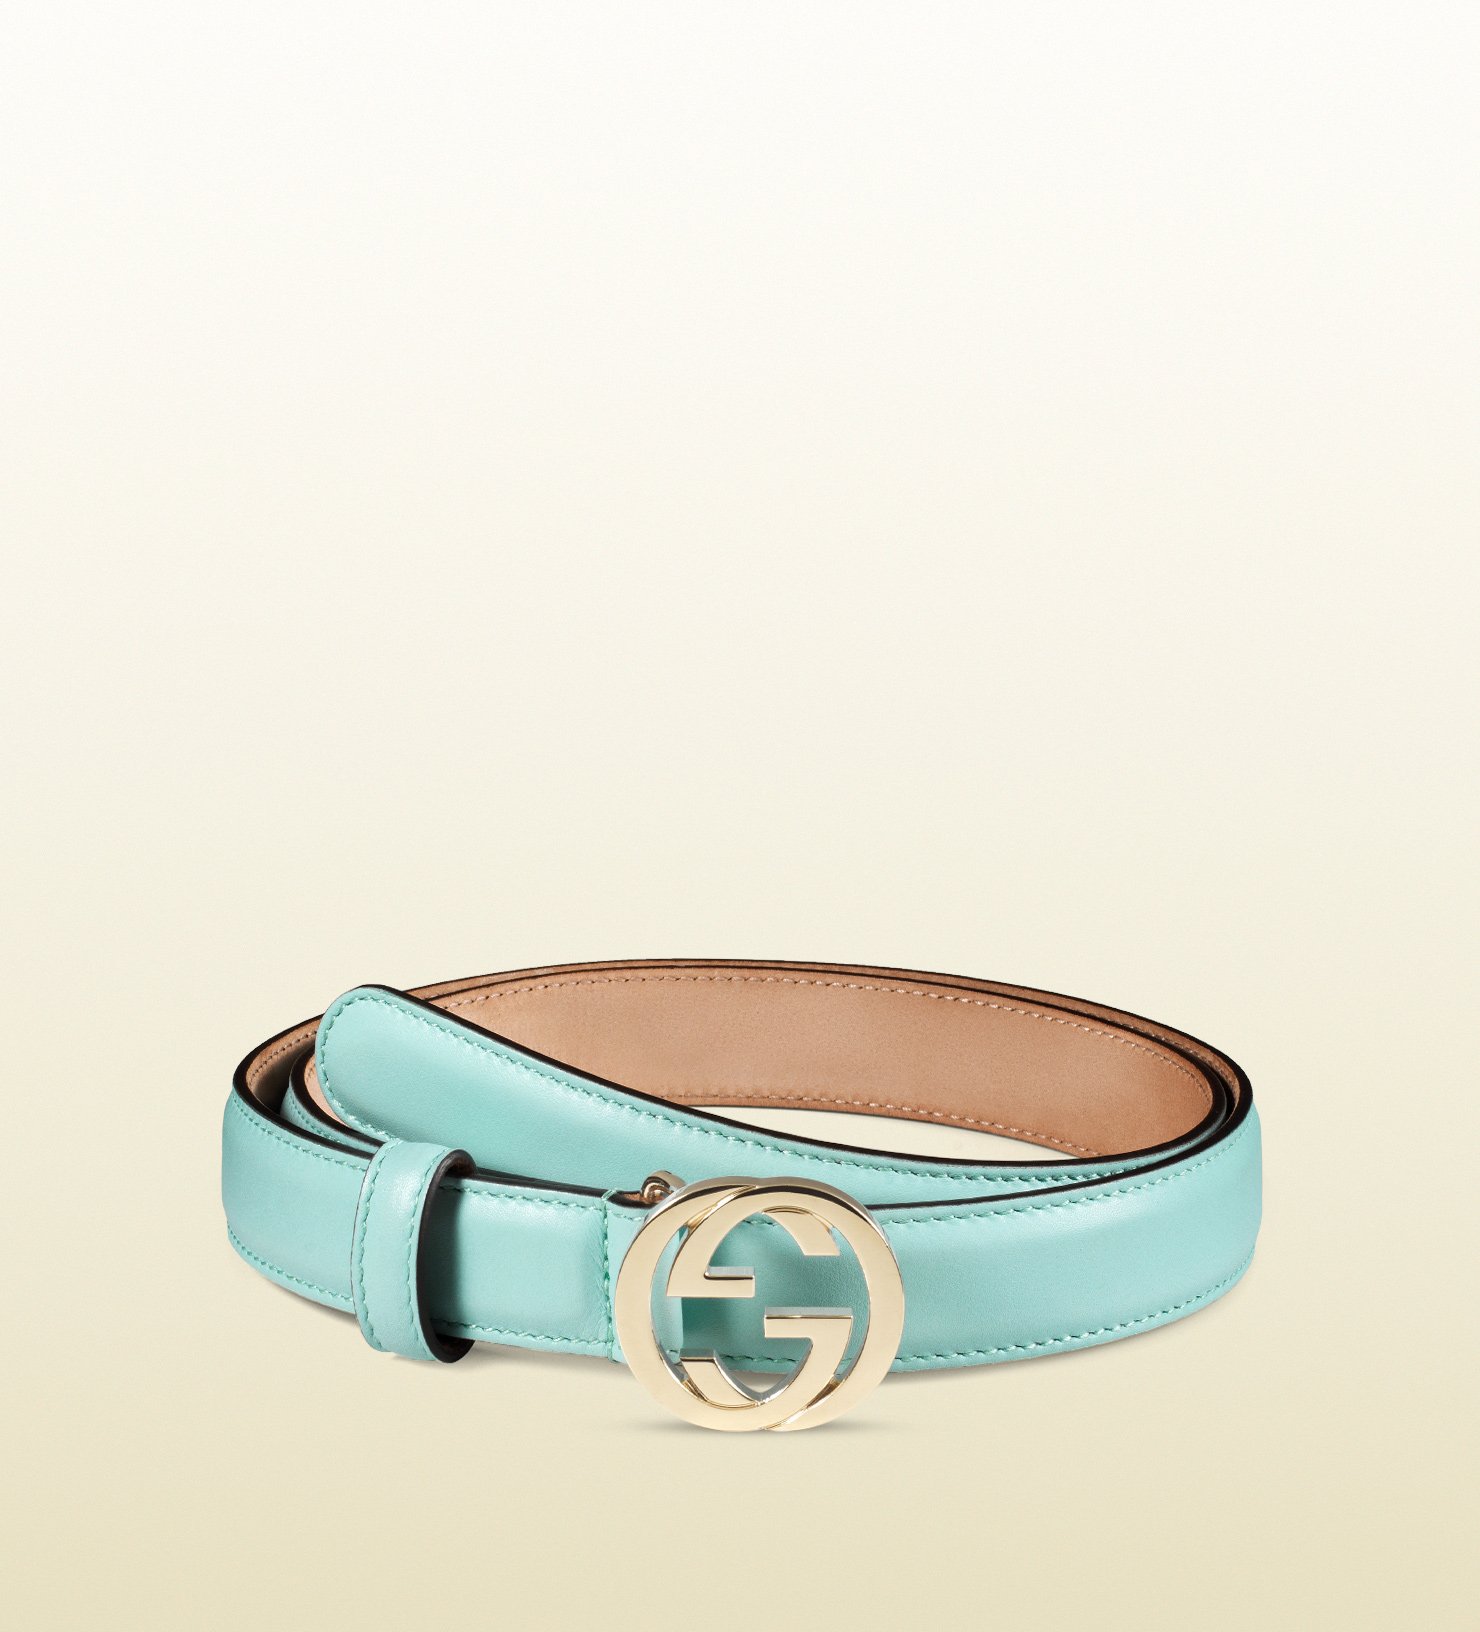 Lyst - Gucci Leather Belt With Interlocking G Buckle in Blue for Men